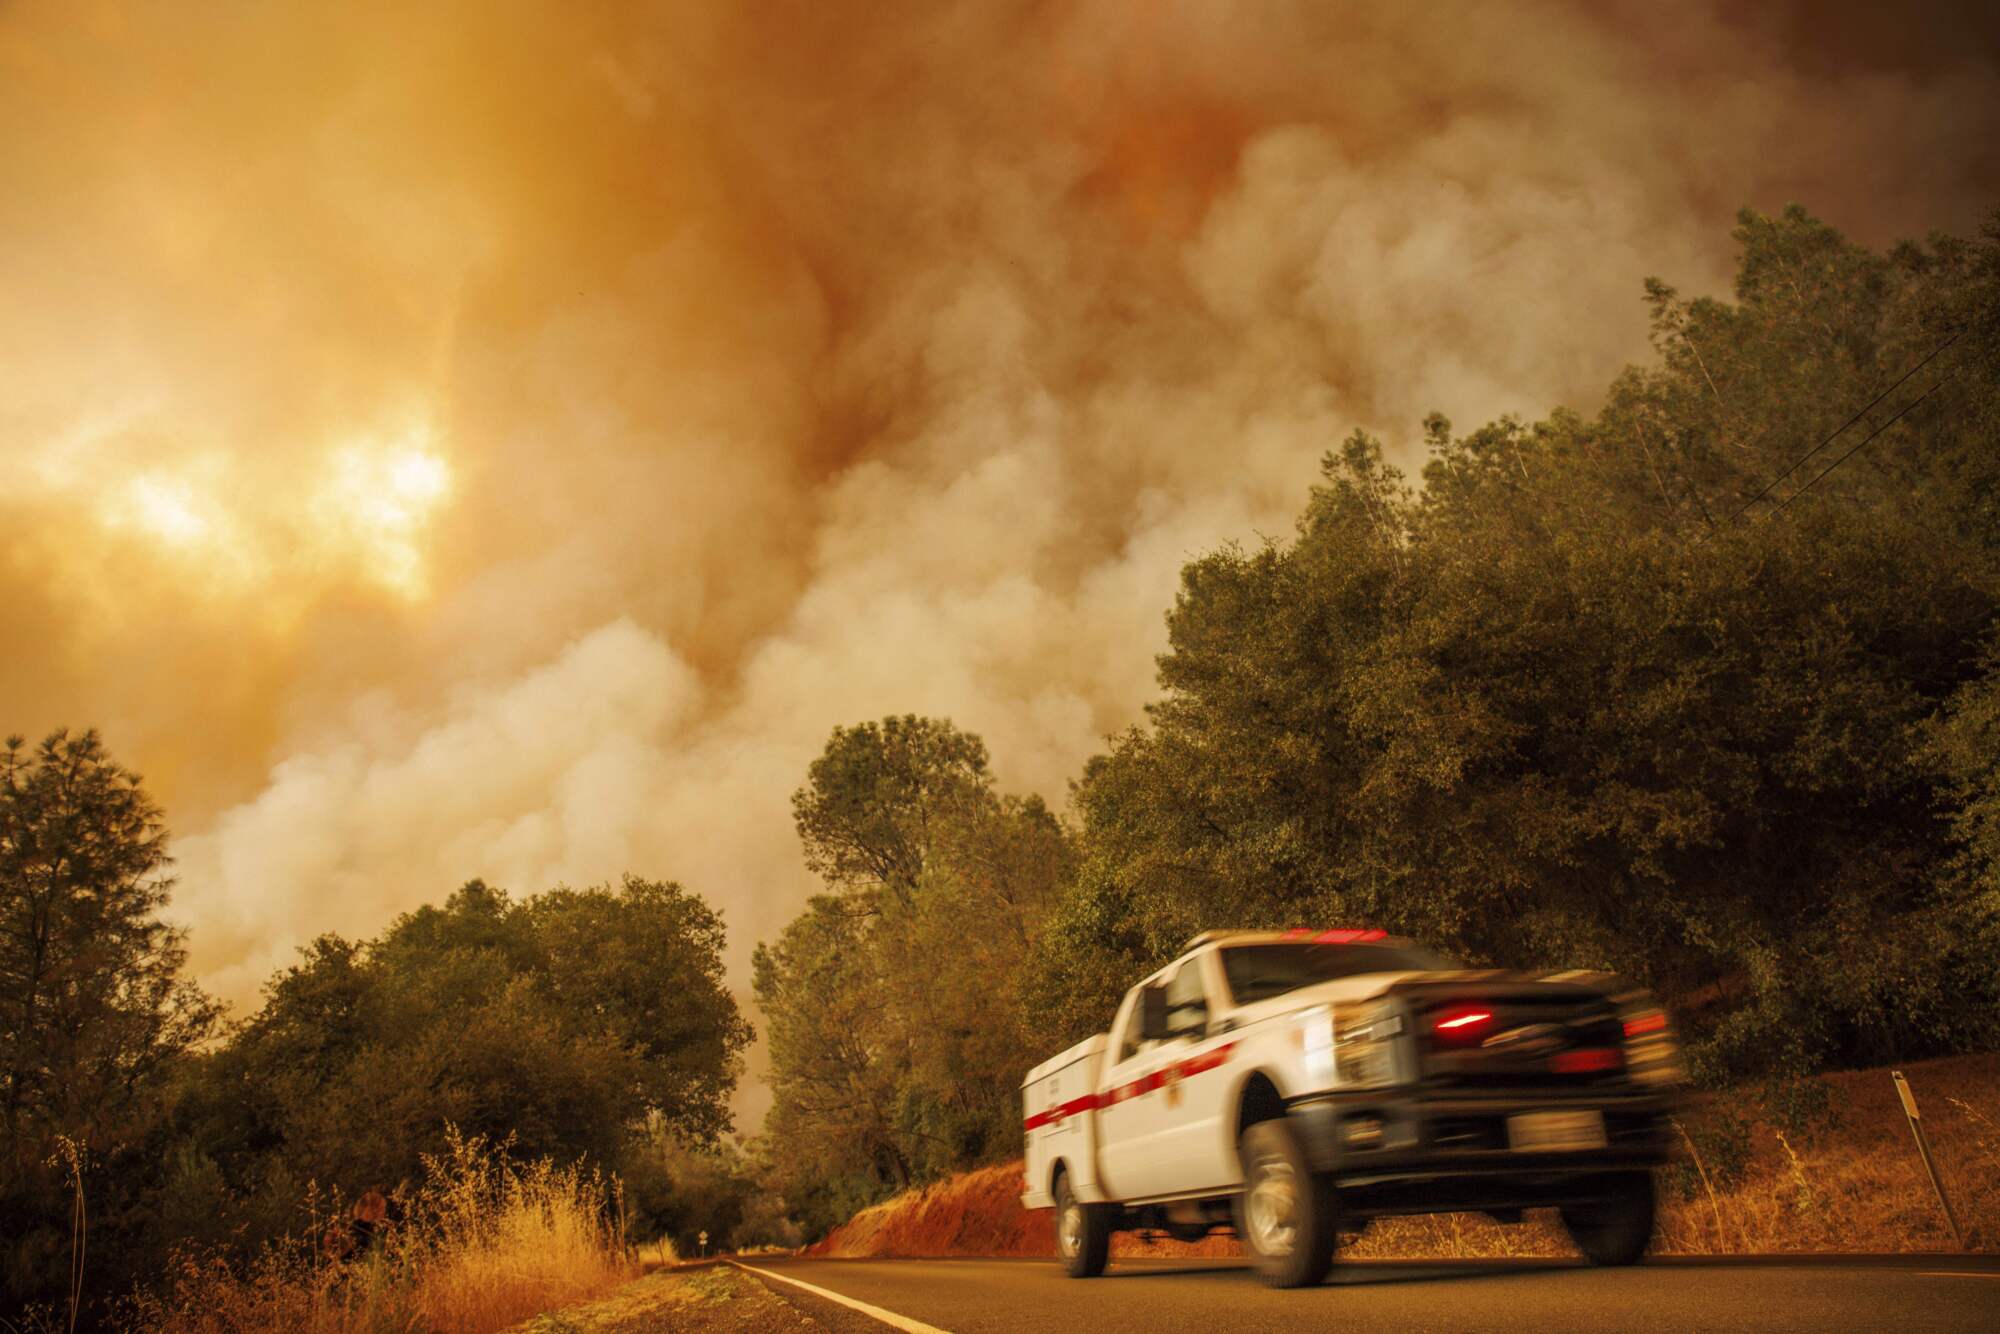 A firetruck passes as the Thompson fire burns in Oroville.